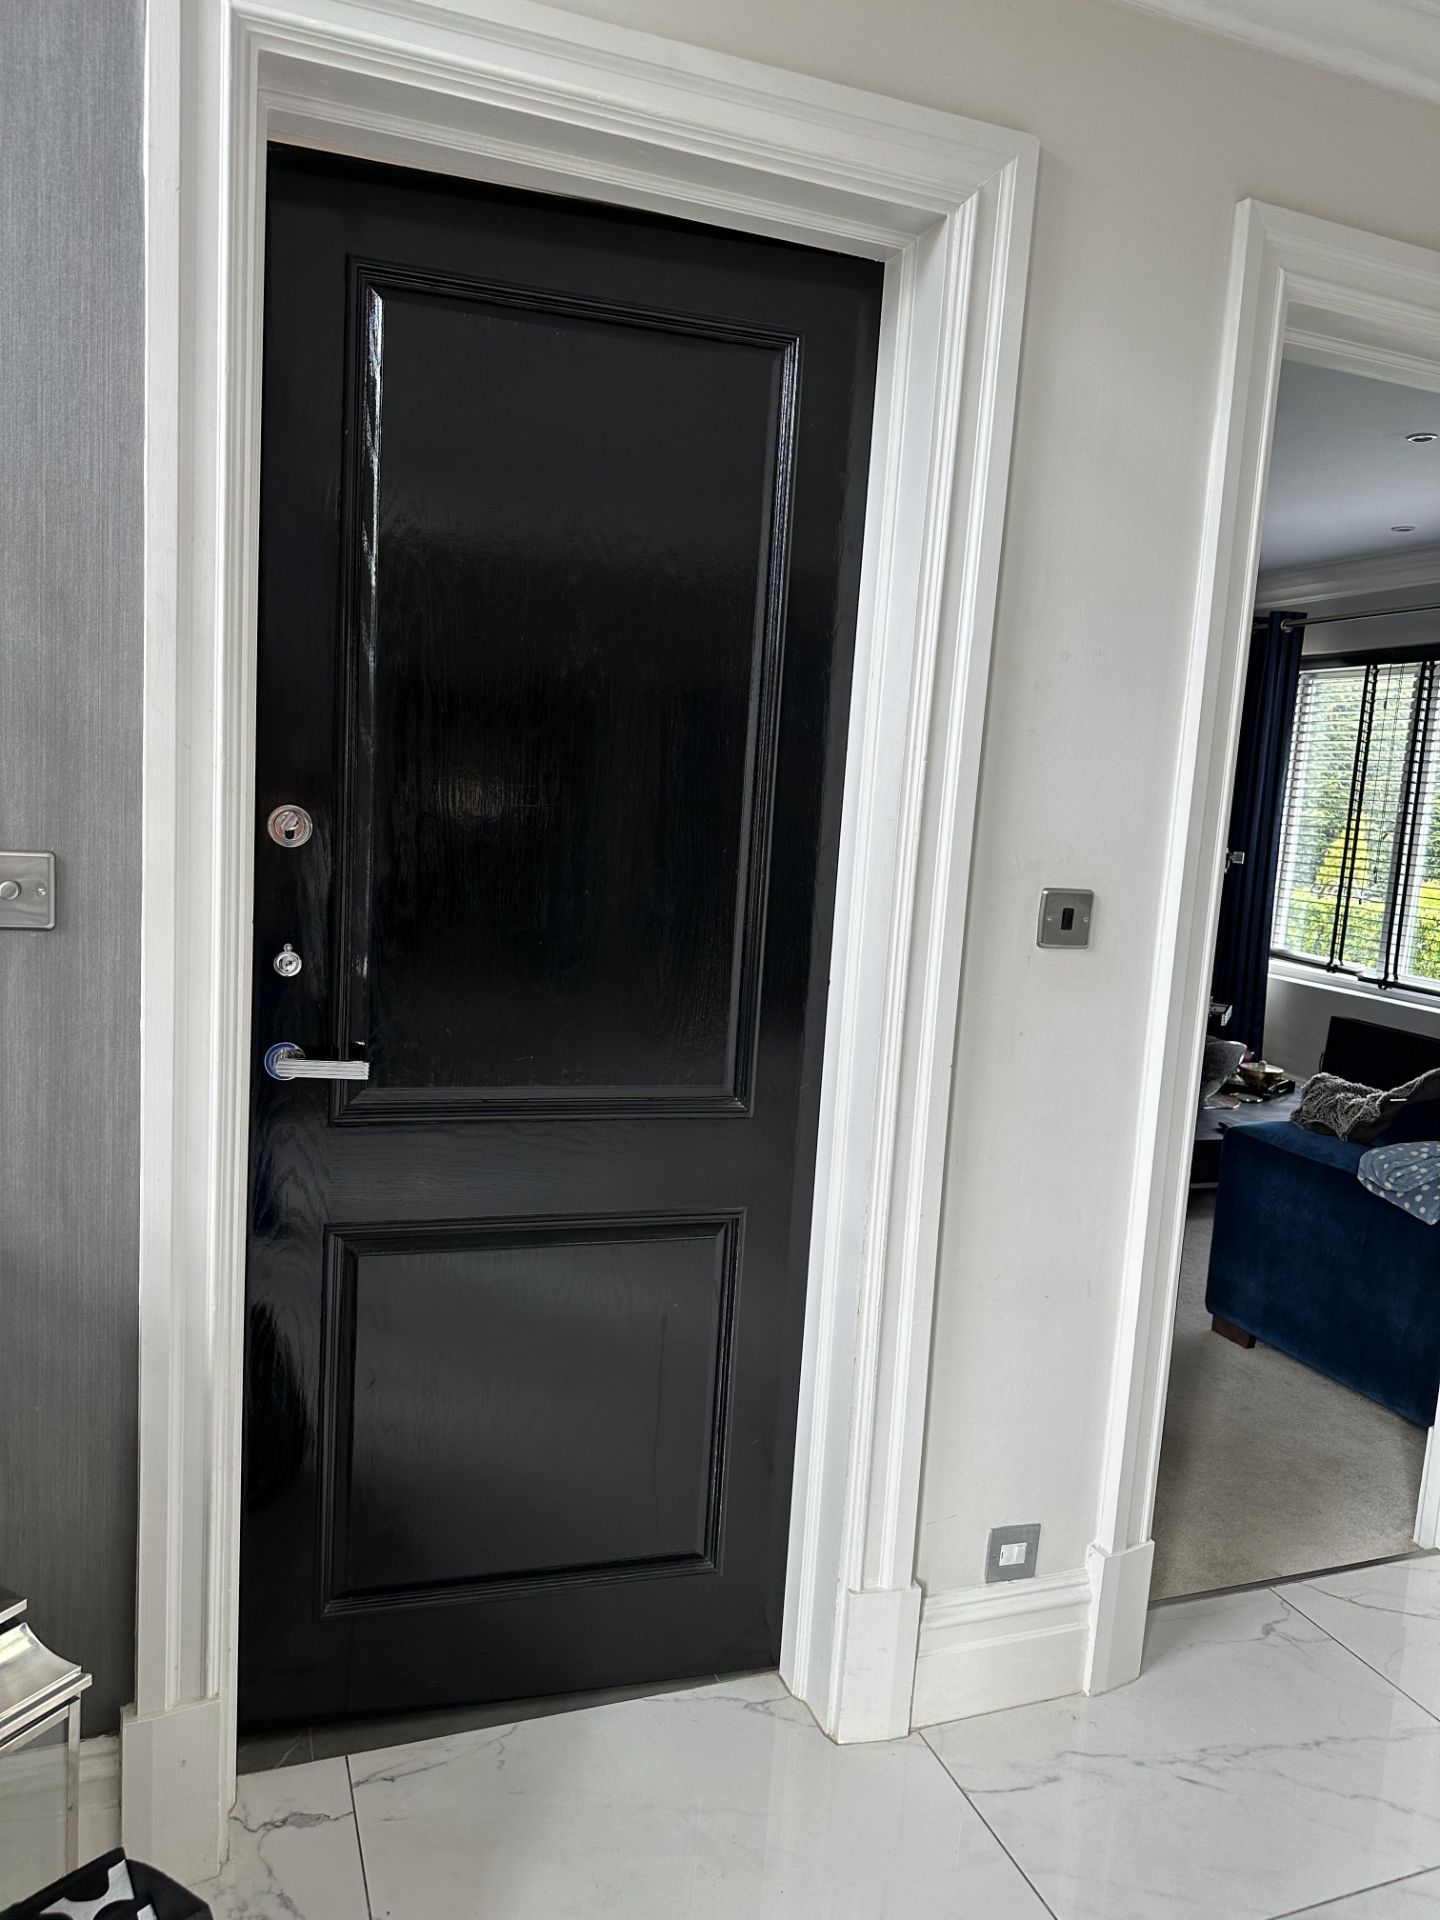 1 x SOLID OAK Fire Door In Black Gloss And Stainless Steel Hardware